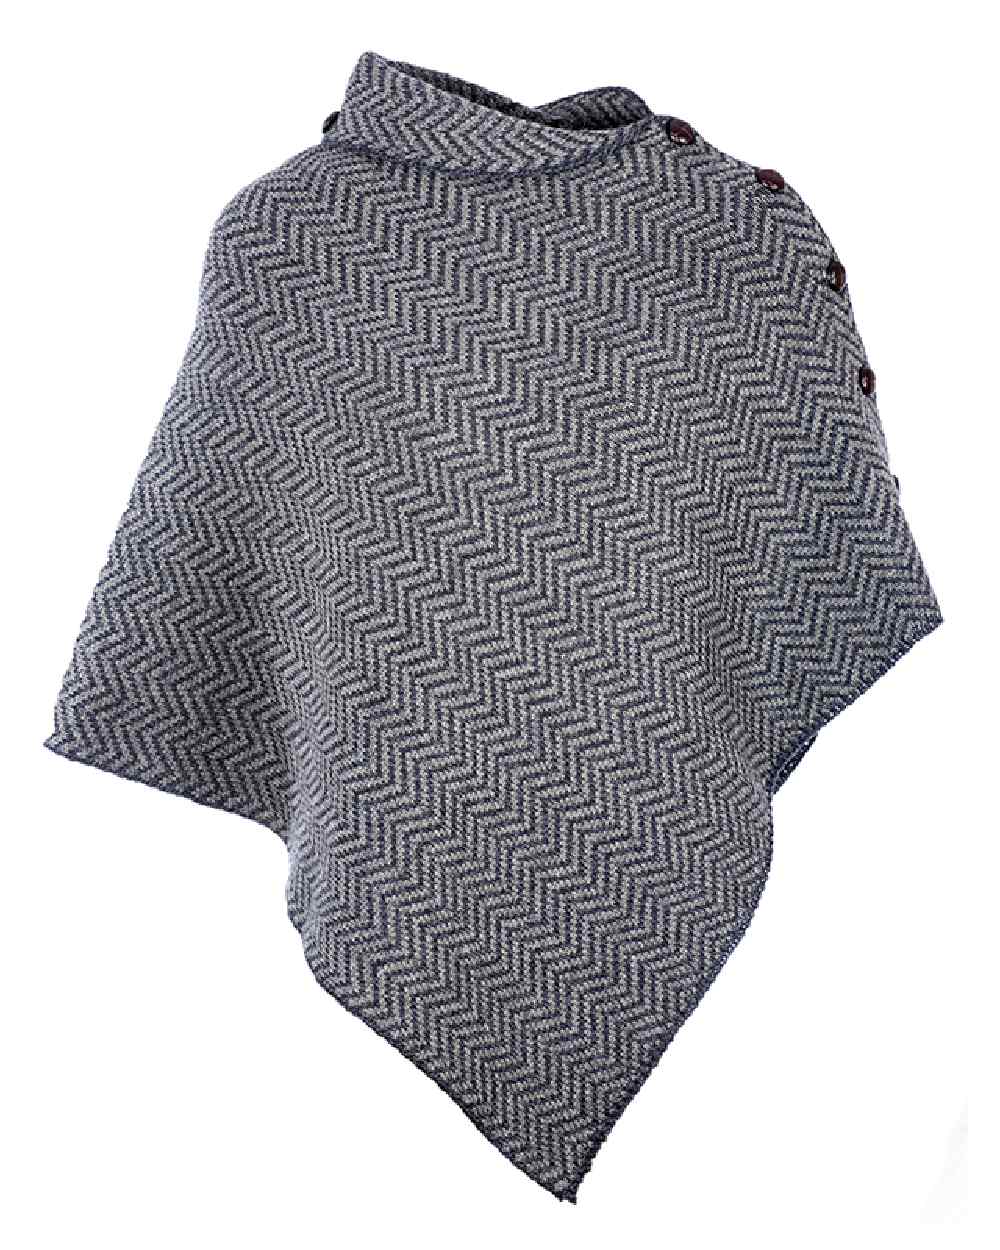 Aran Herringbone Poncho with Buttons in Charcoal 